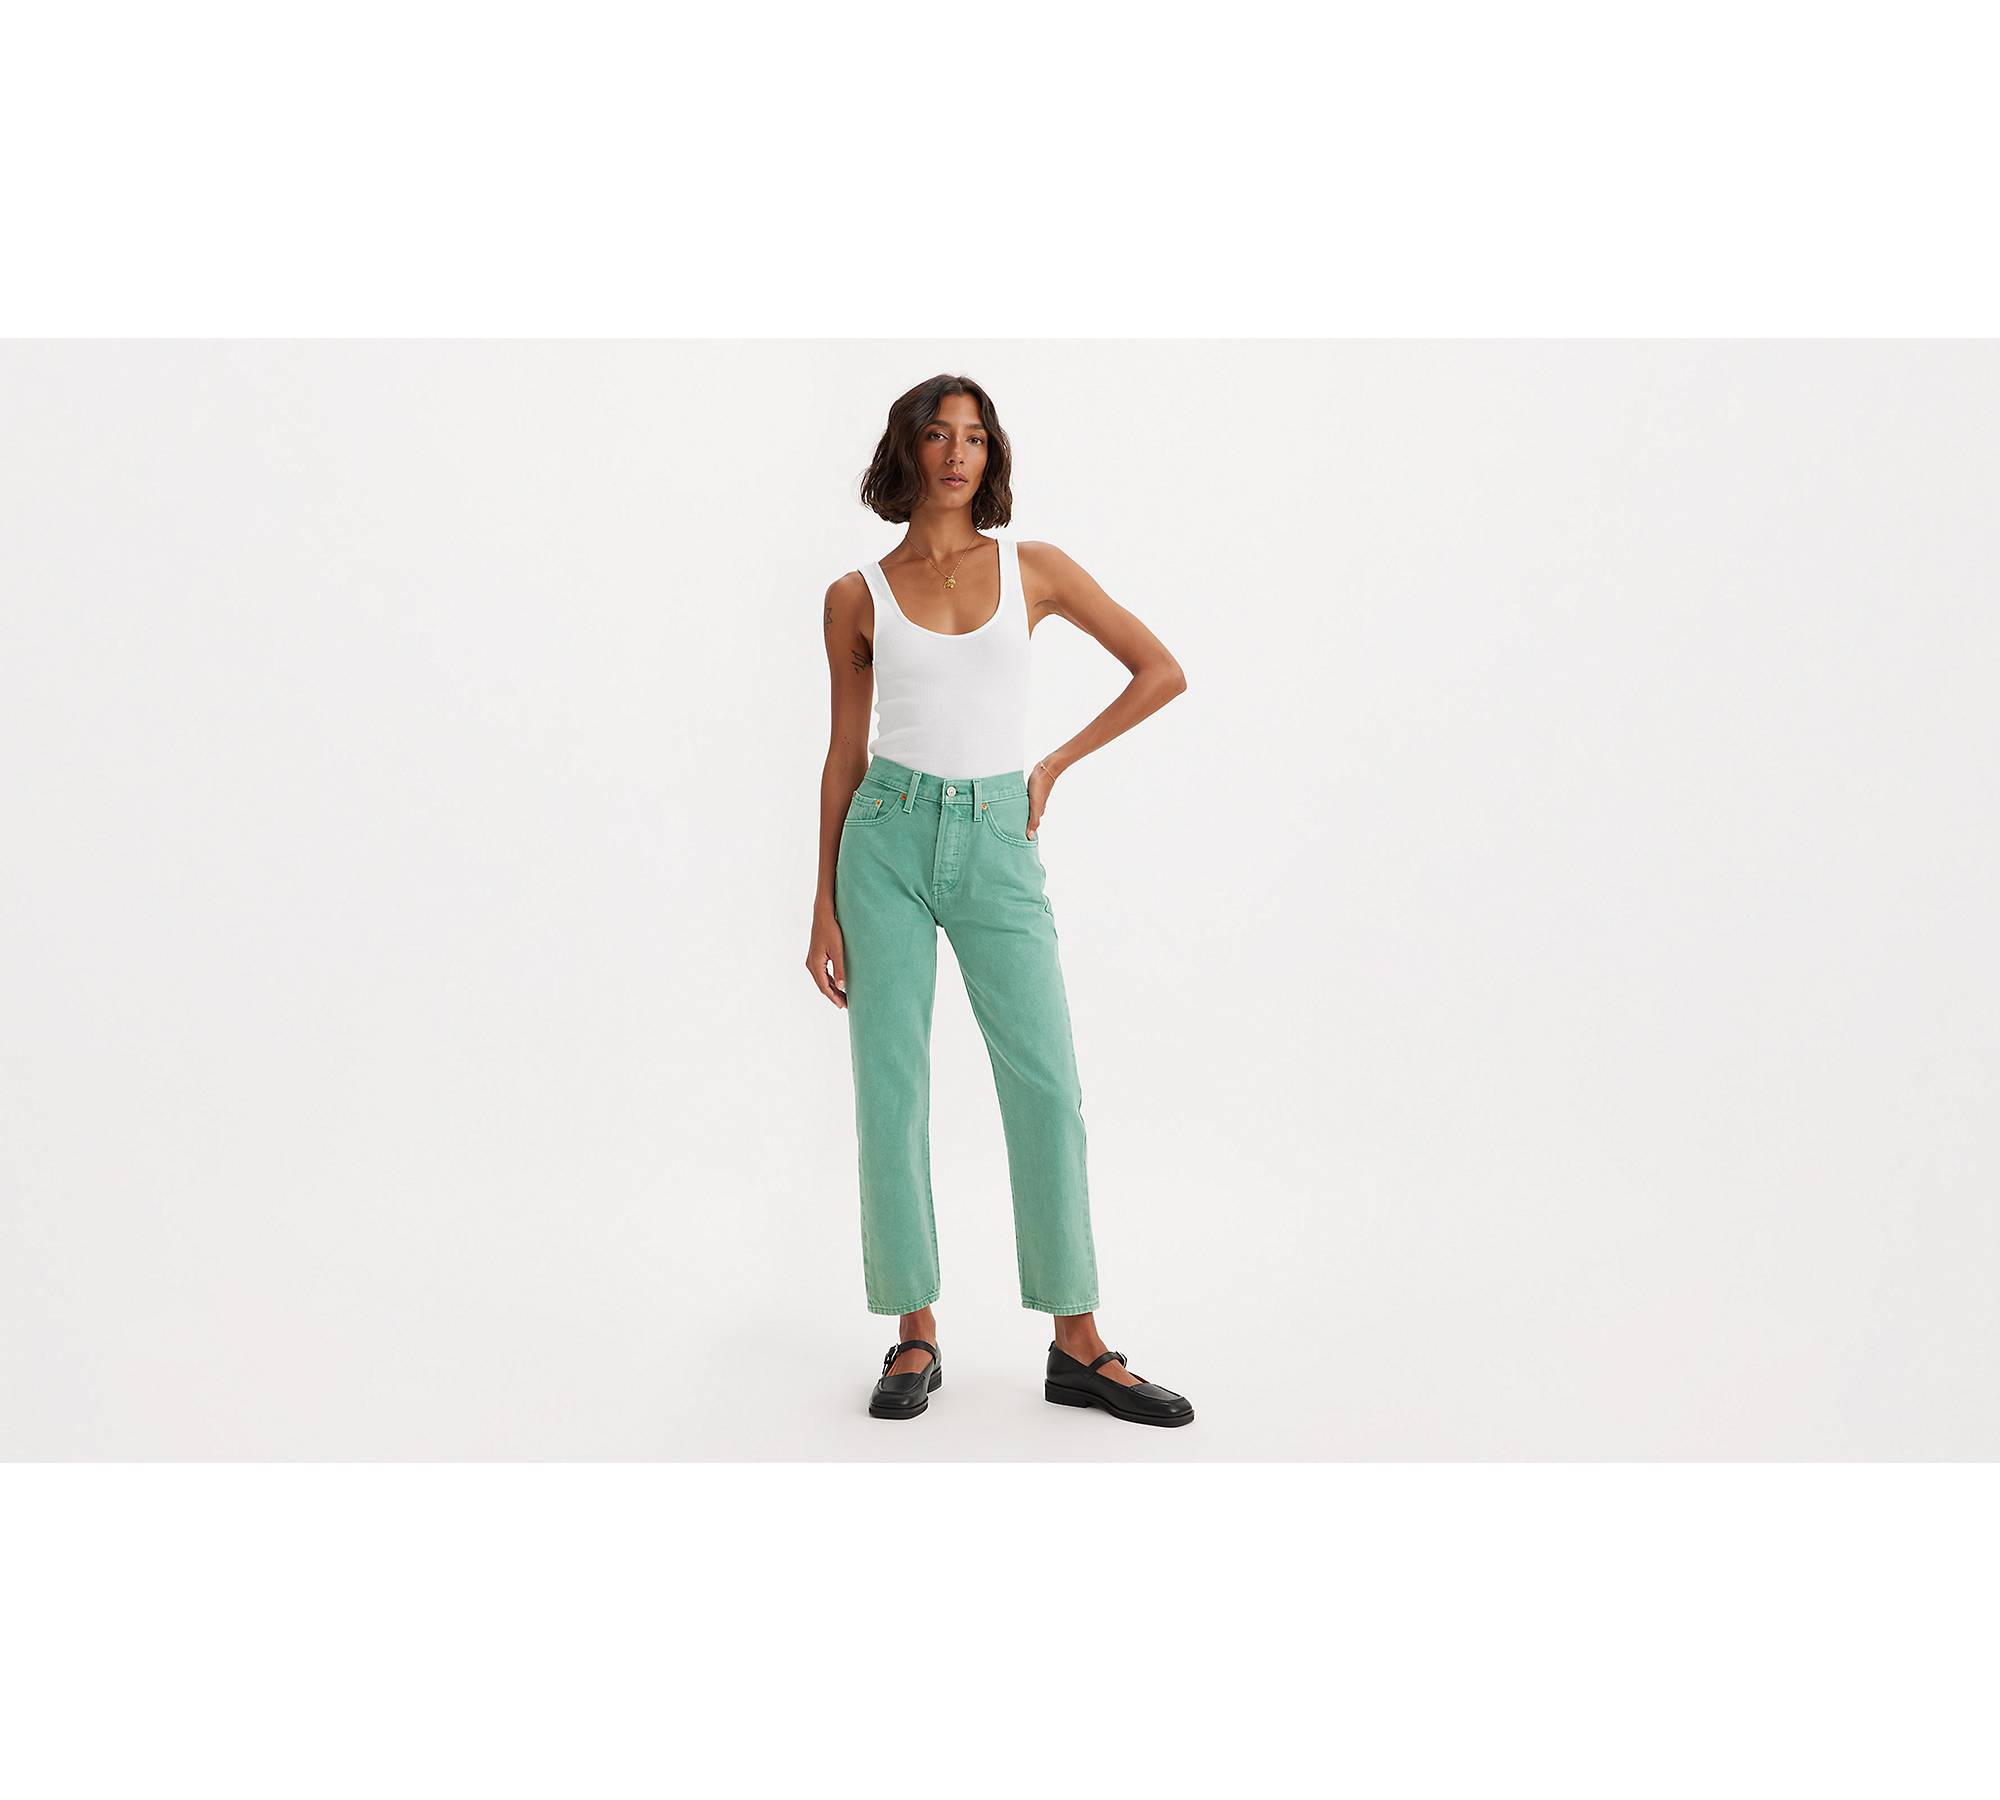 A New Day Women's High-Rise Cropped Wide Leg Pants - (2, Mint Green) at   Women's Clothing store